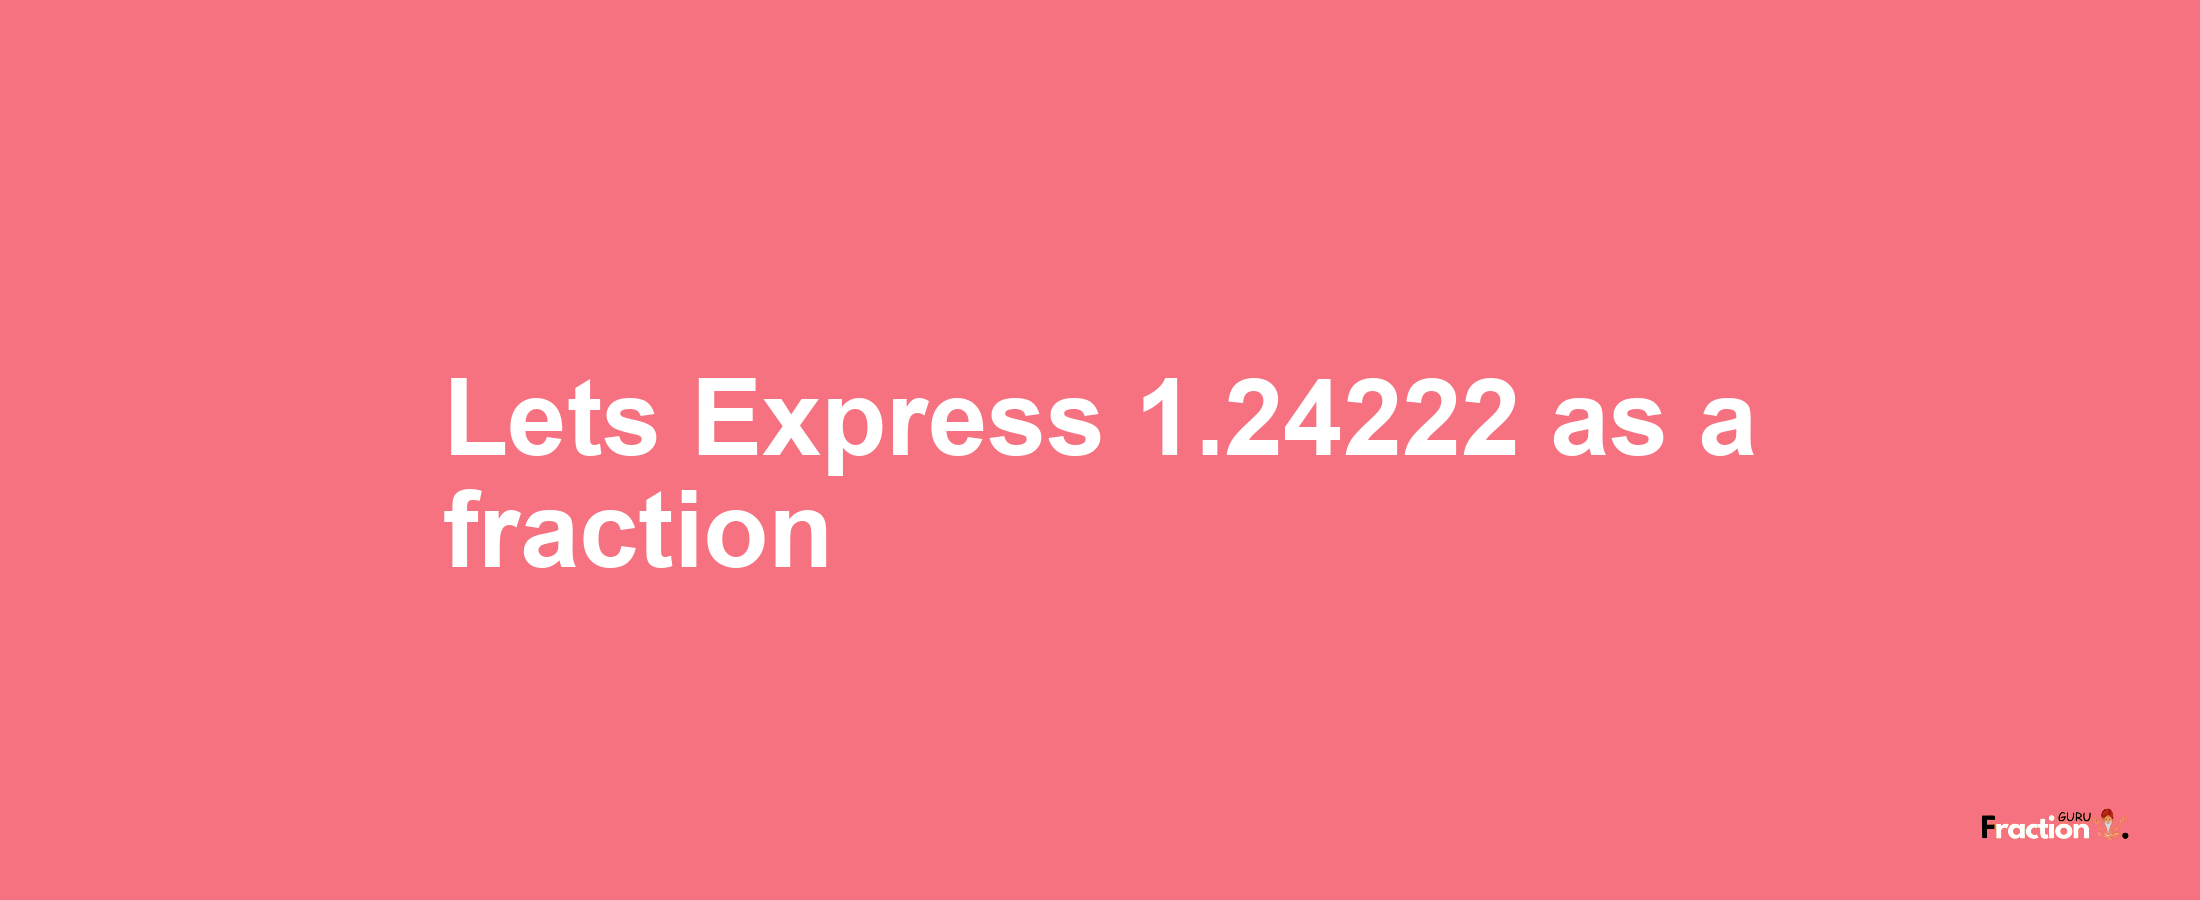 Lets Express 1.24222 as afraction